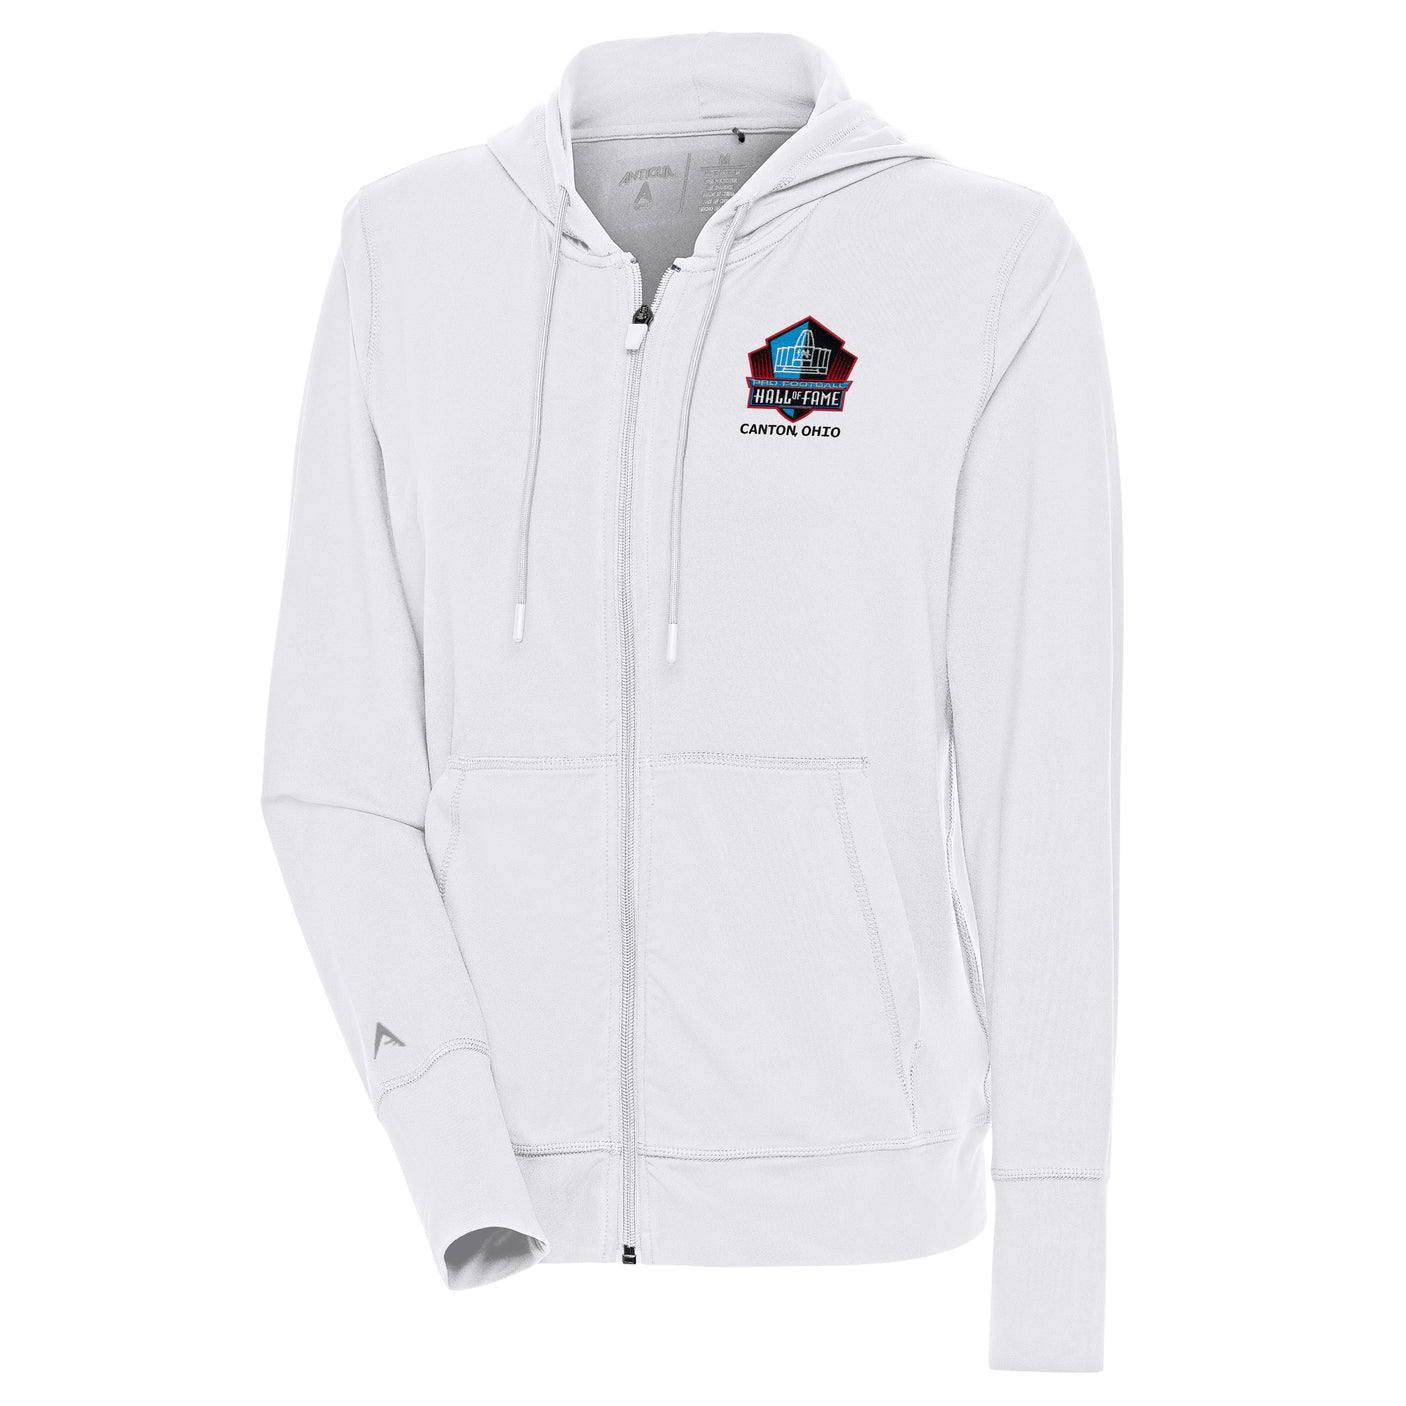 Hall of Fame Women's Antigua Moving Front Zip Jacket